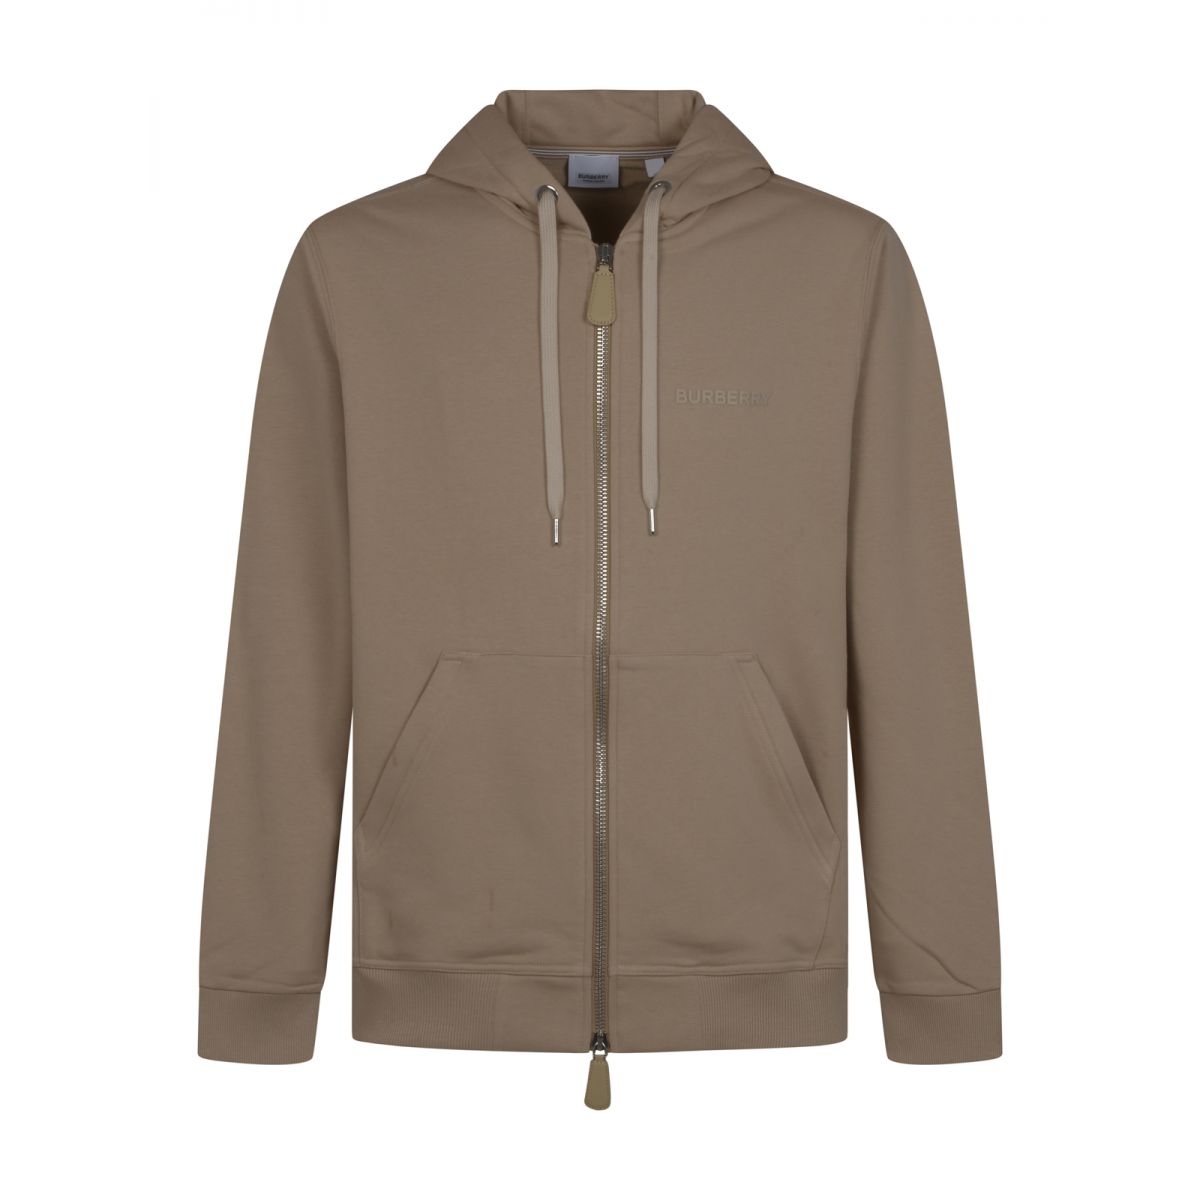 BURBERRY - Sweashirt in stretch cotton with a hood and logo